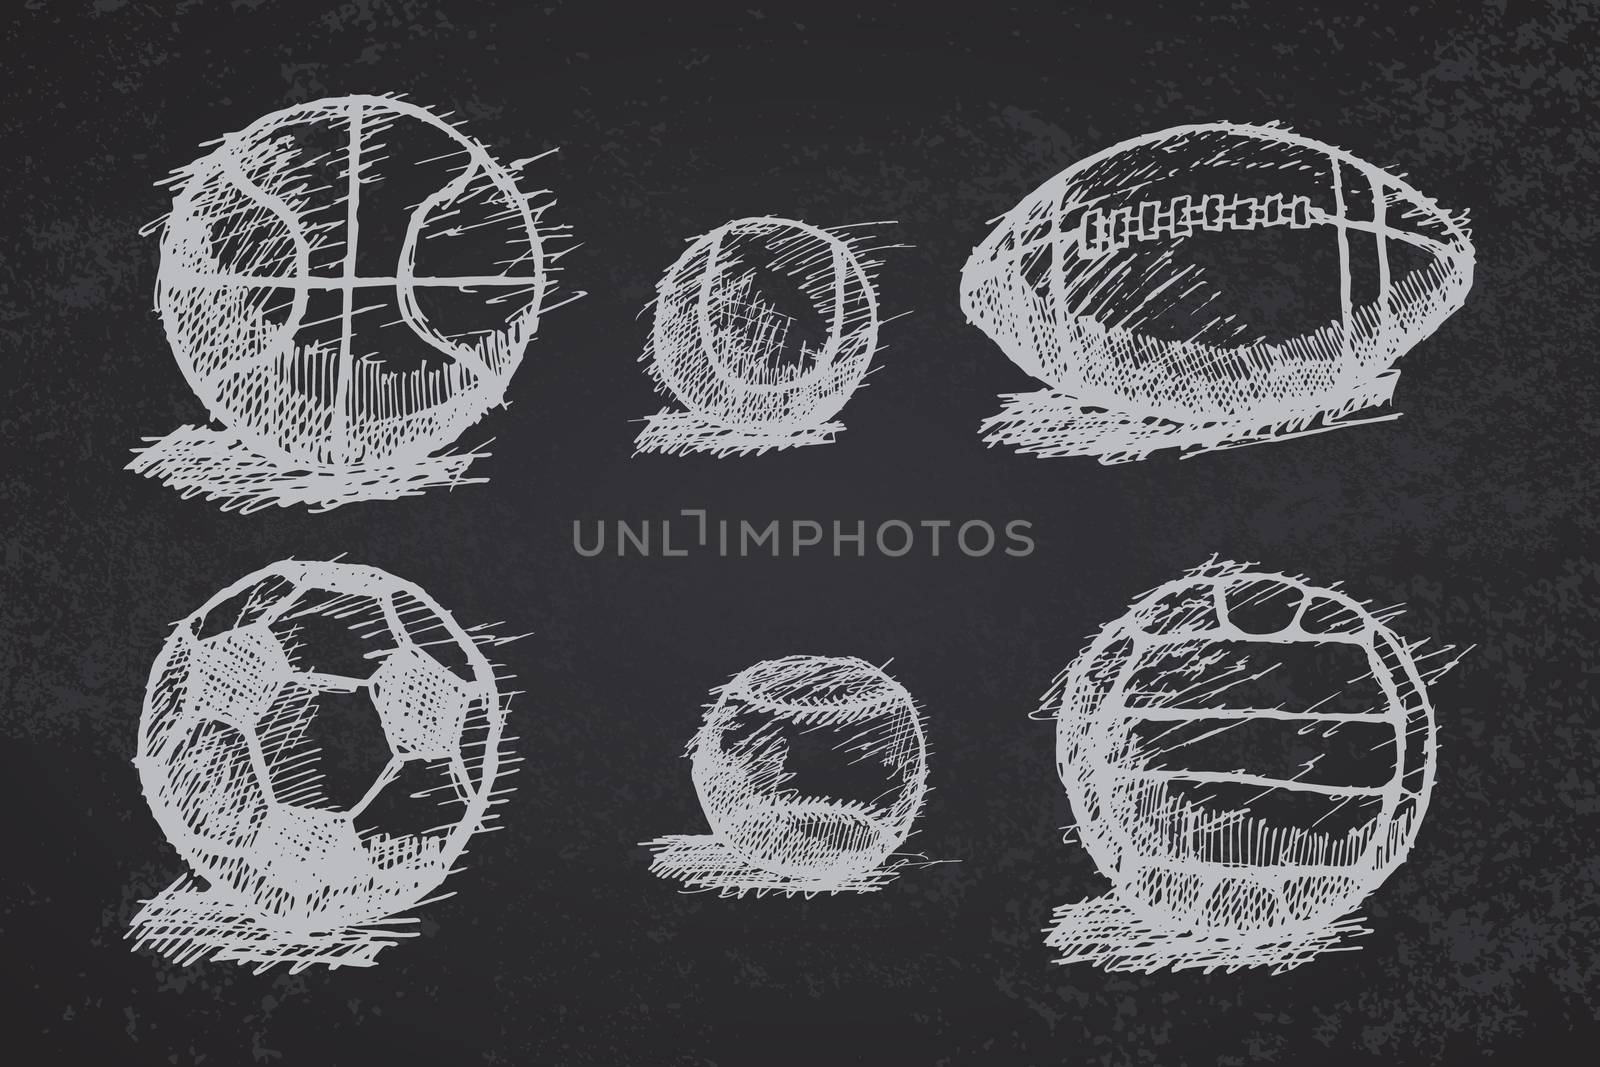 Ball sketch set with shadow on the ground on blackboard.